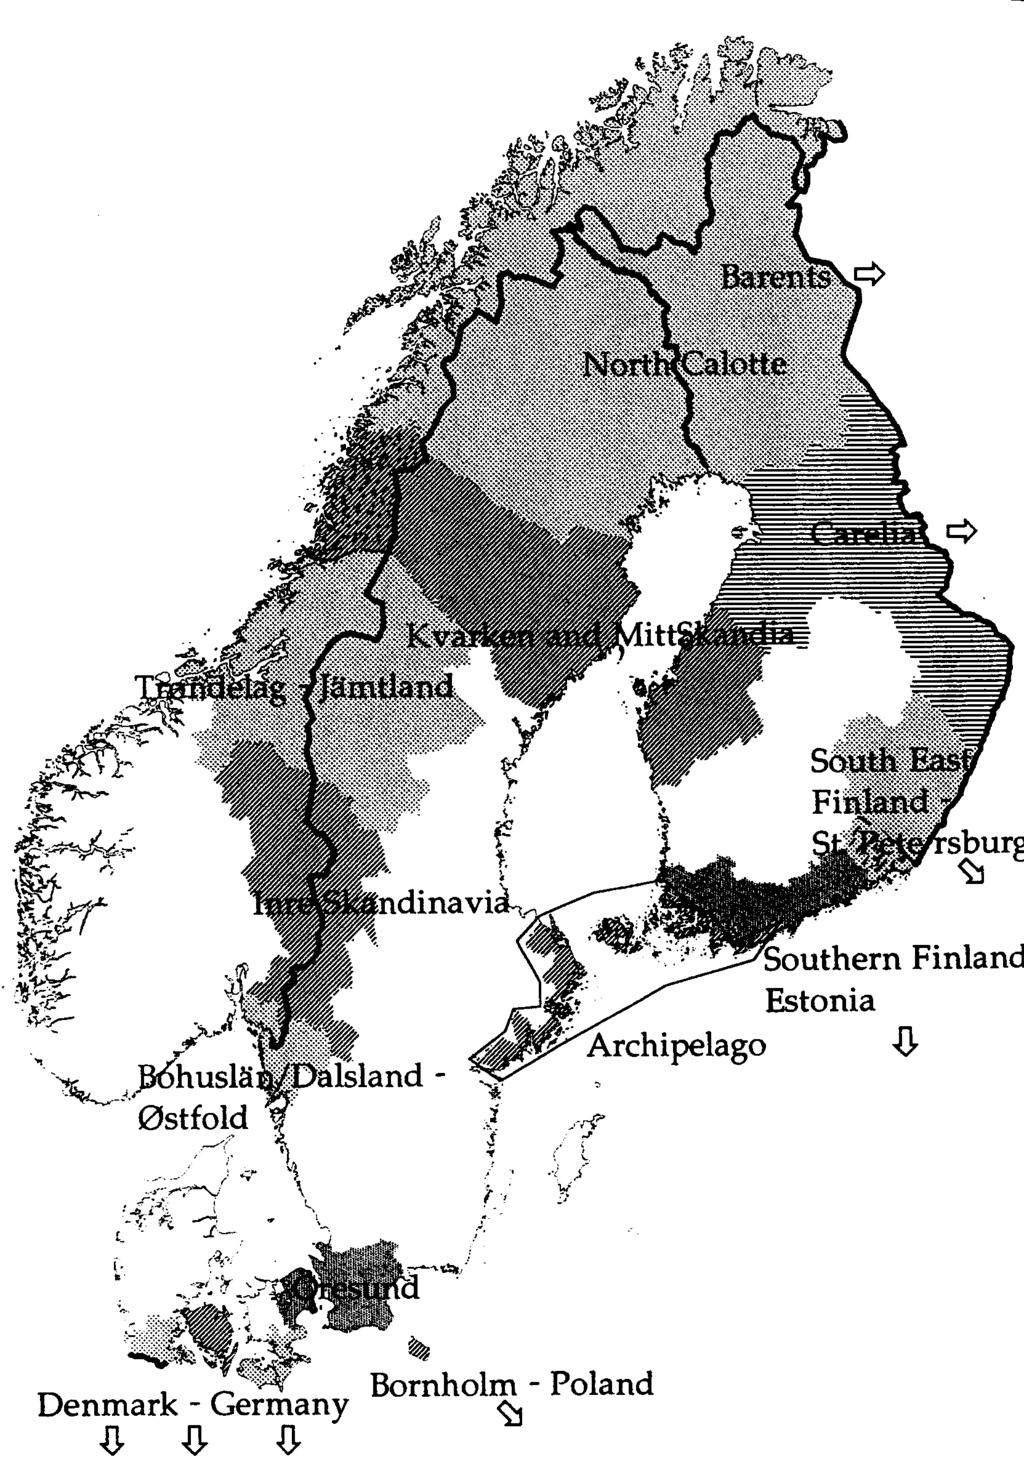 3 generated from the mid-term evaluation project, operated by NIBR for all the three programmes. The first phase of the mid-term evaluation were published last autumn (Mønnesland et.al. 1997).